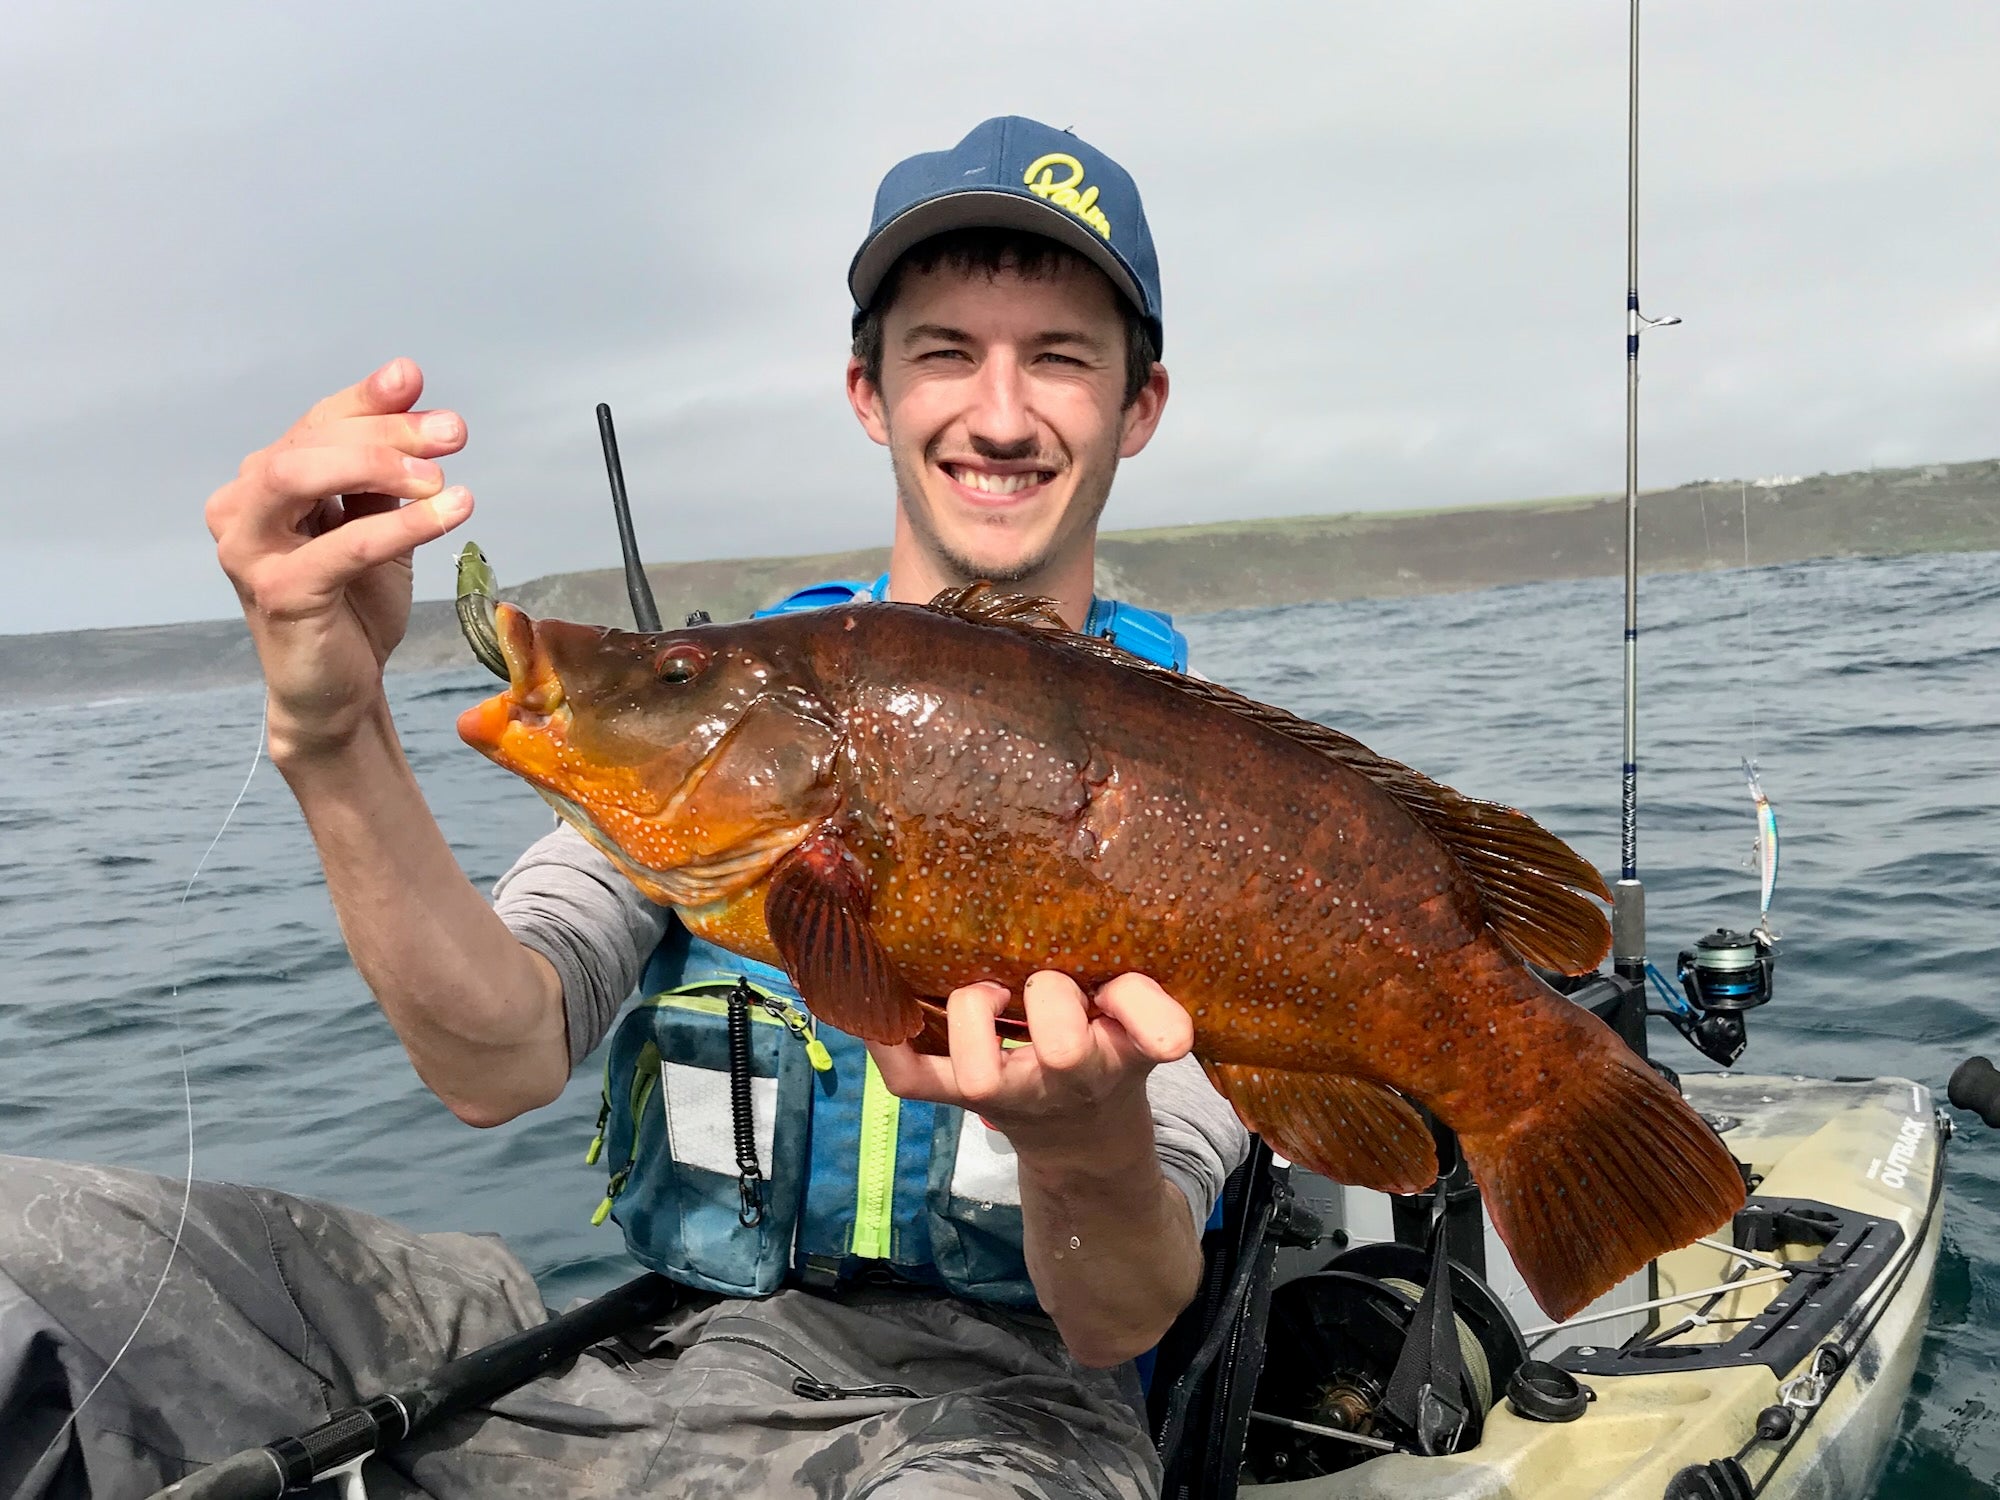 Liam with a specimen Ballan Wrasse caught on a lure from his kayak